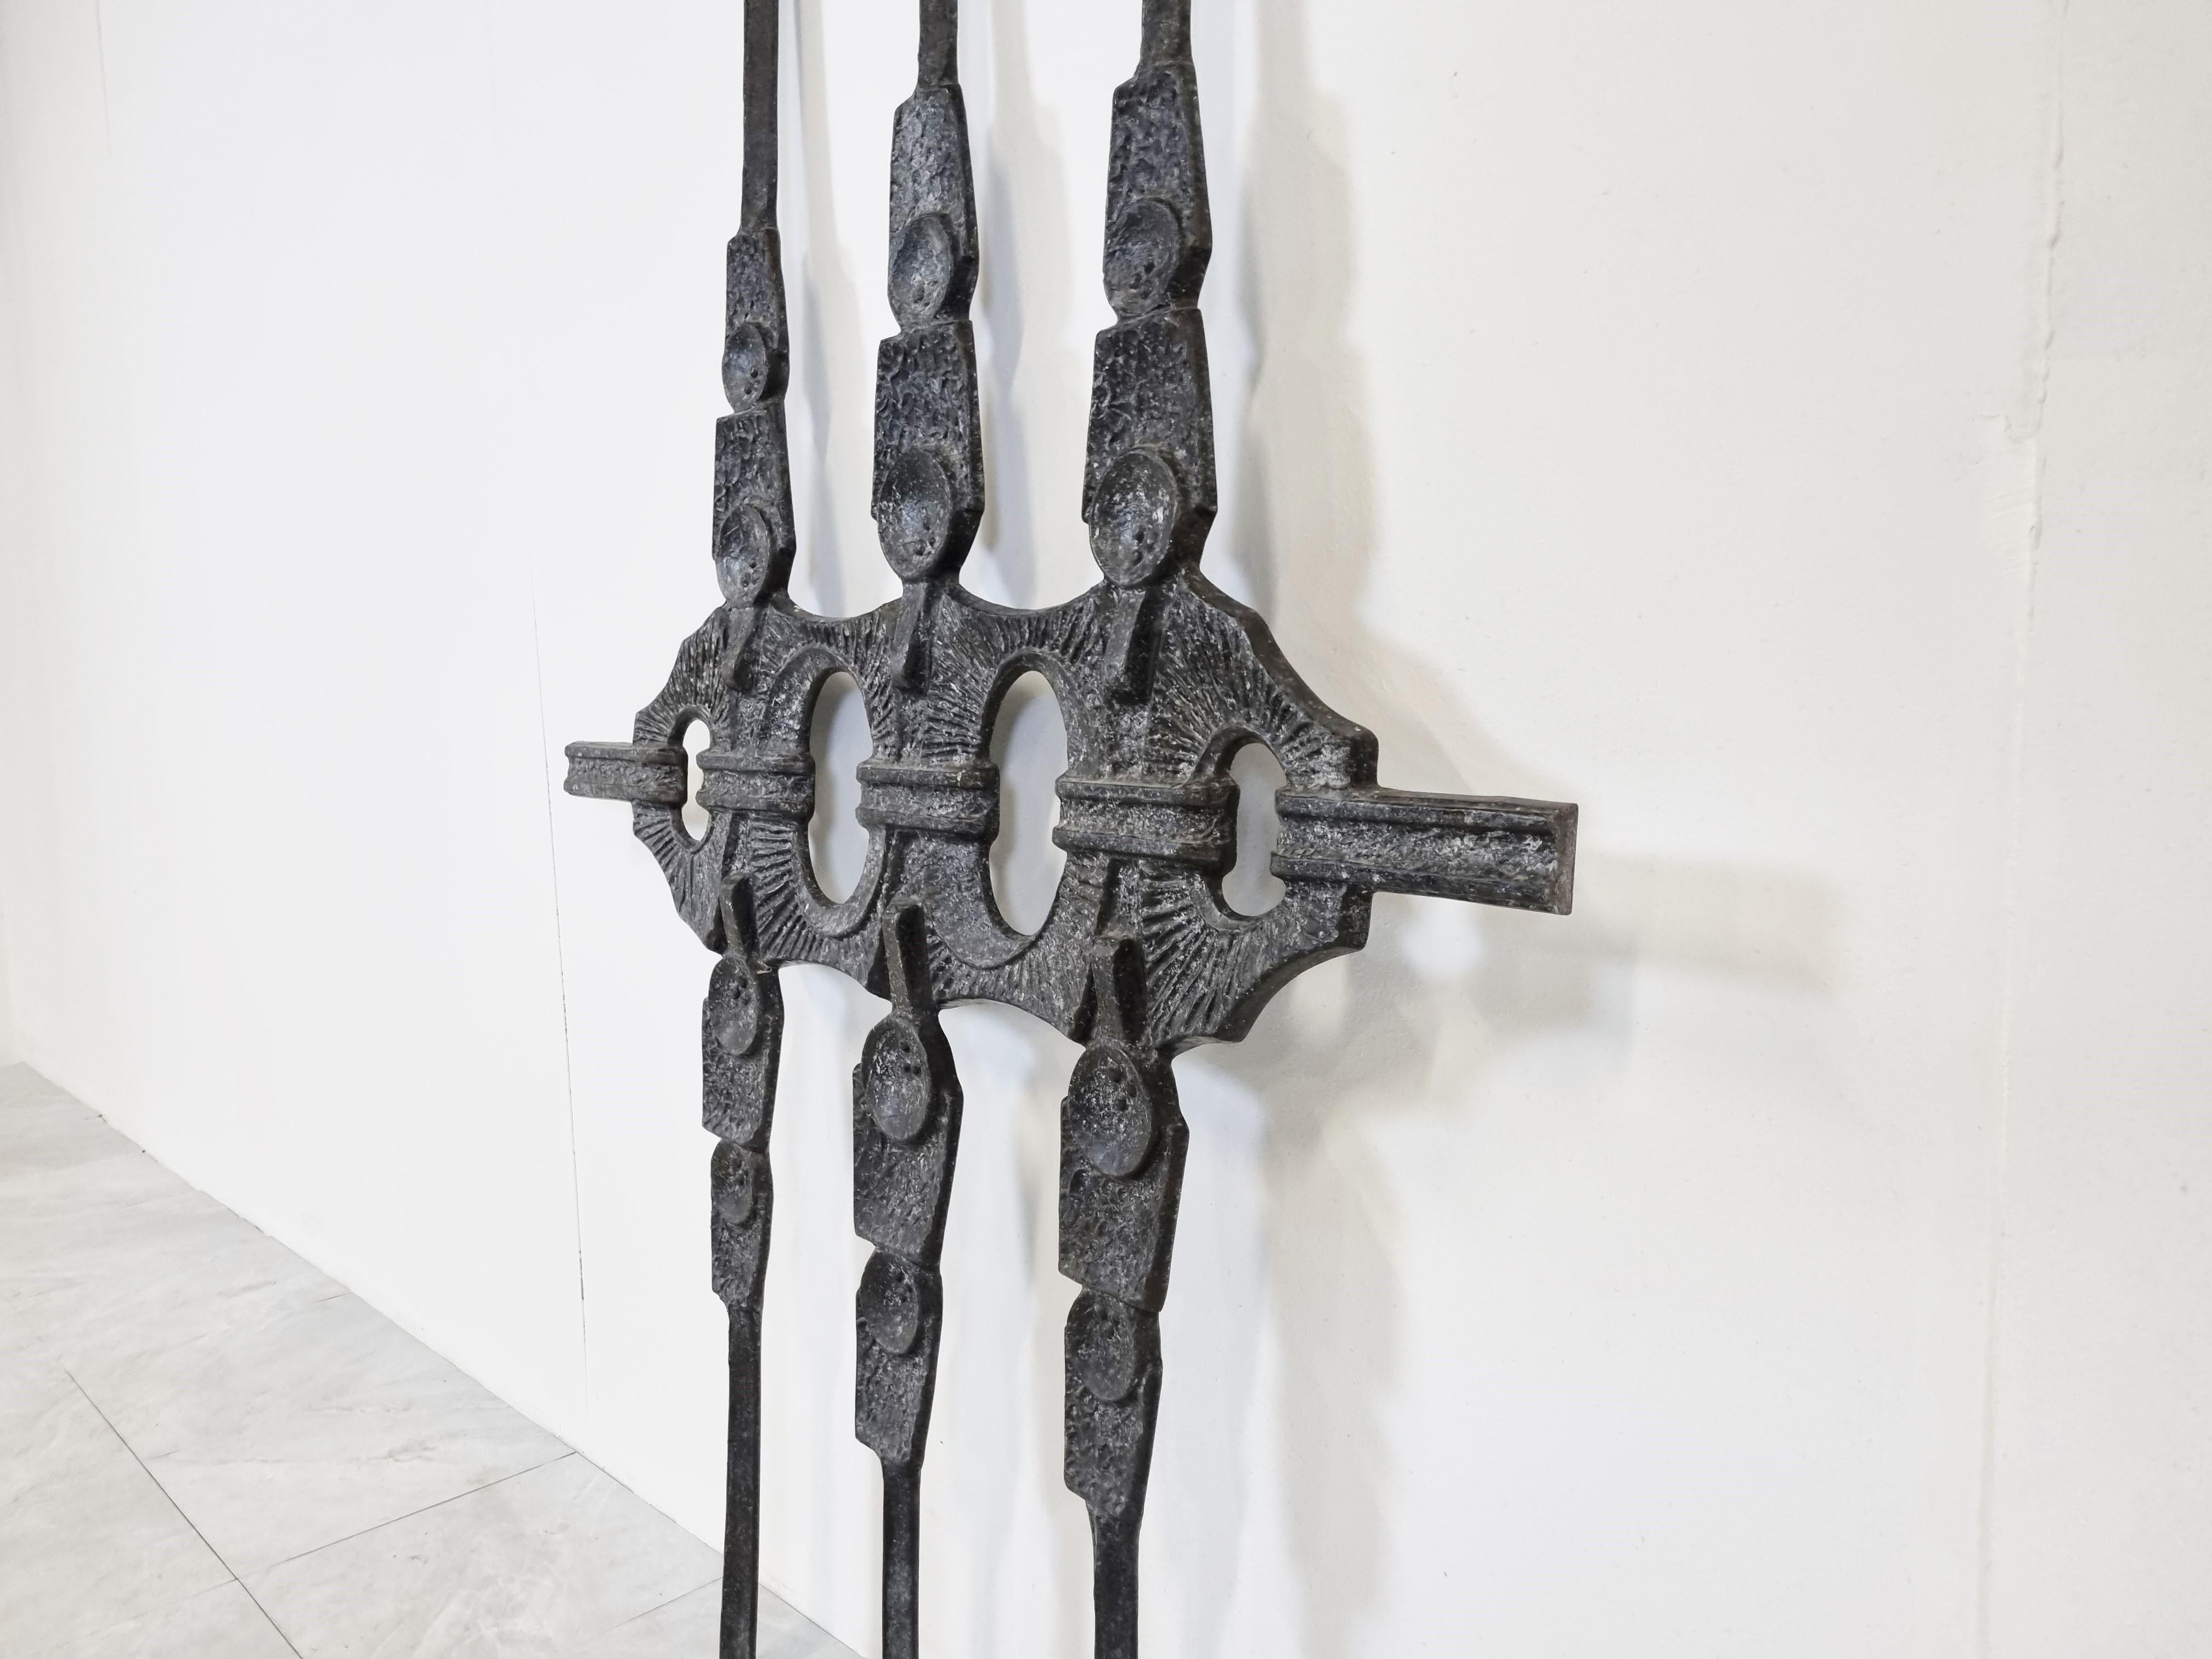 Architectural Brutalist wall mounted sculpture made from cast metal.

Imposing wall sculpture

1970s - Belgium

Measures: Height/lenght: 195cm/76.77